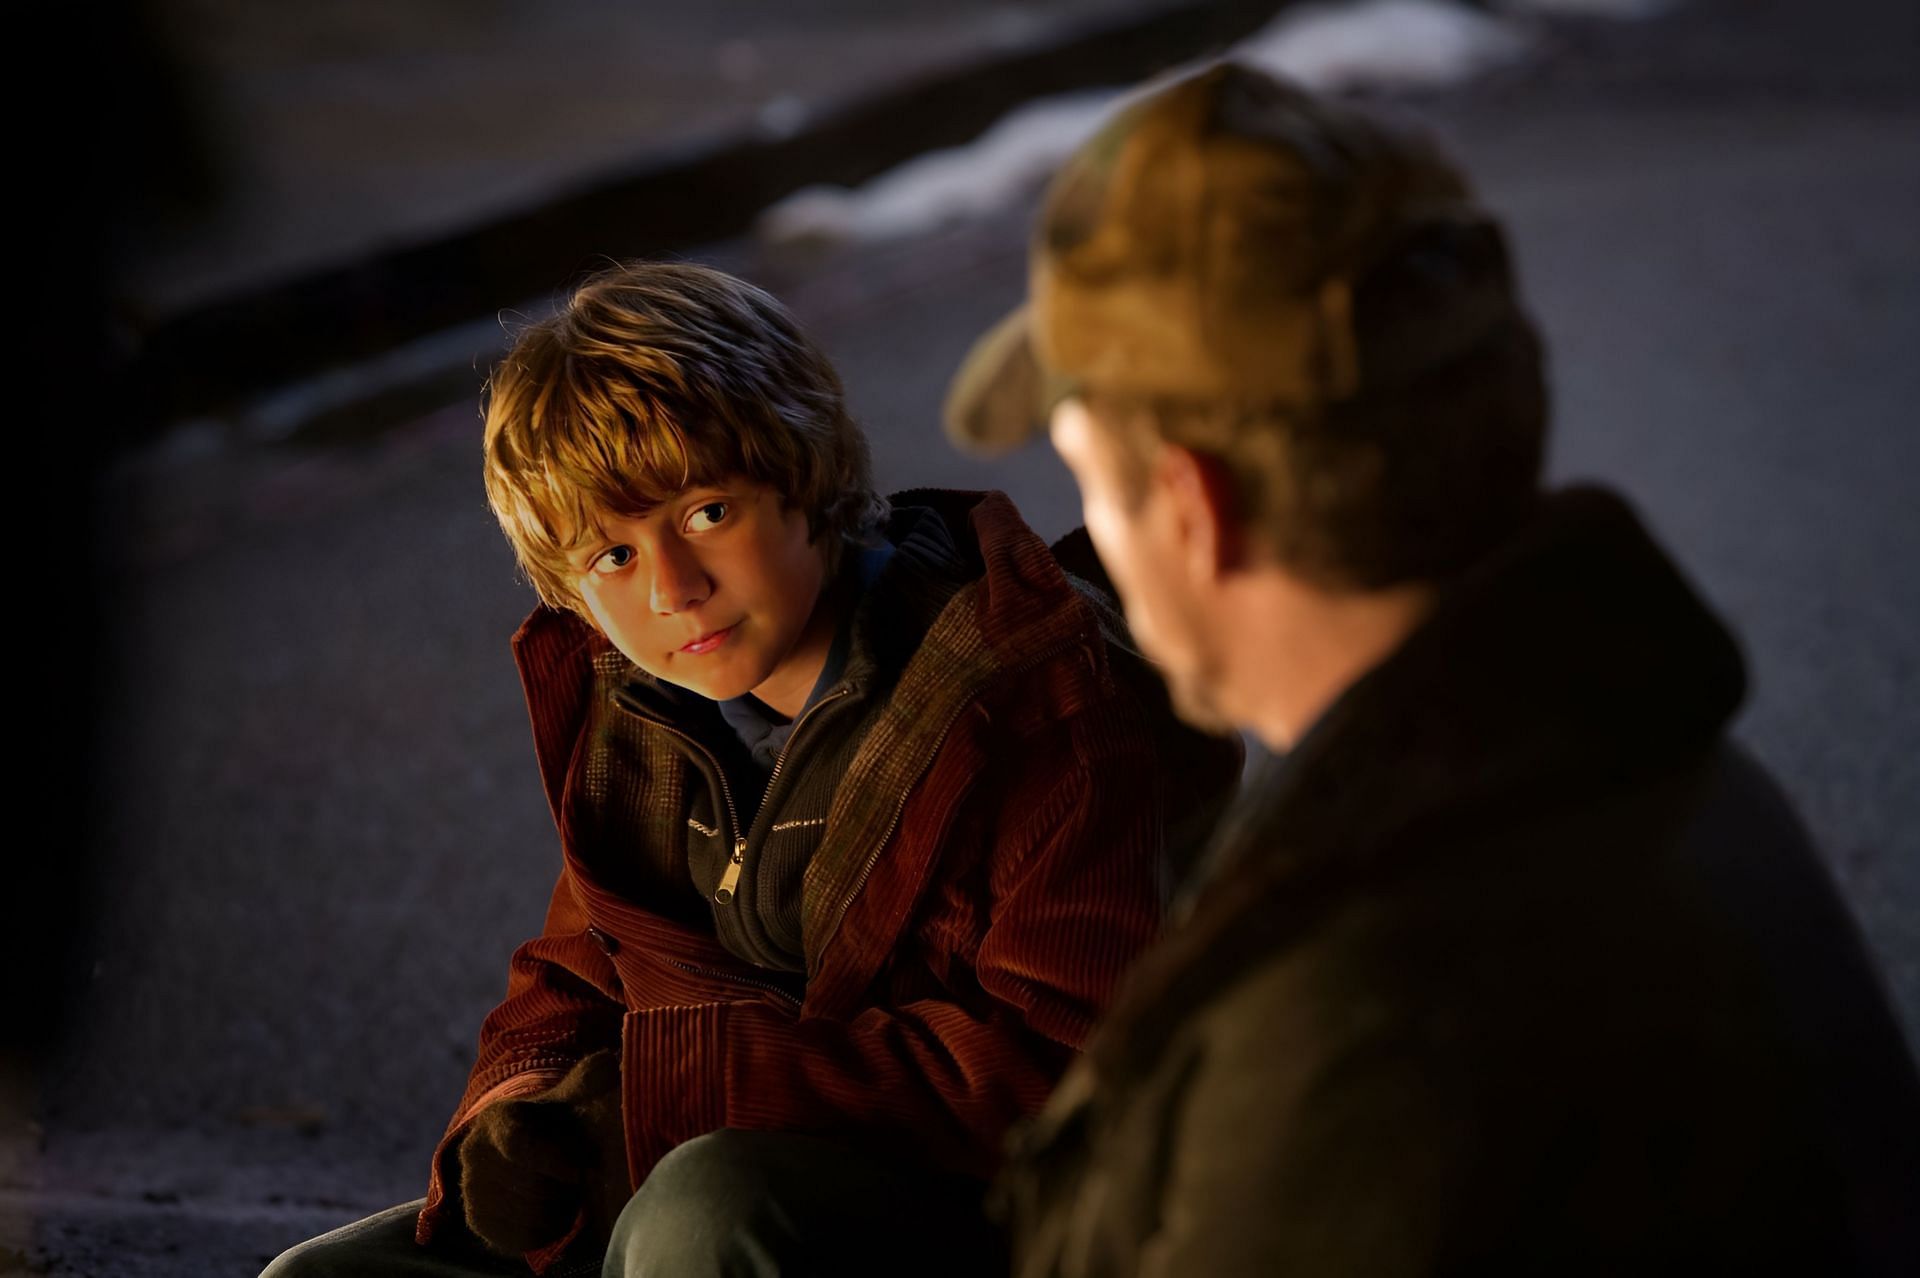 Harley Keener, played by Ty Simpkins, first appeared in Iron Man 3 as a young boy. (Image via Marvel)